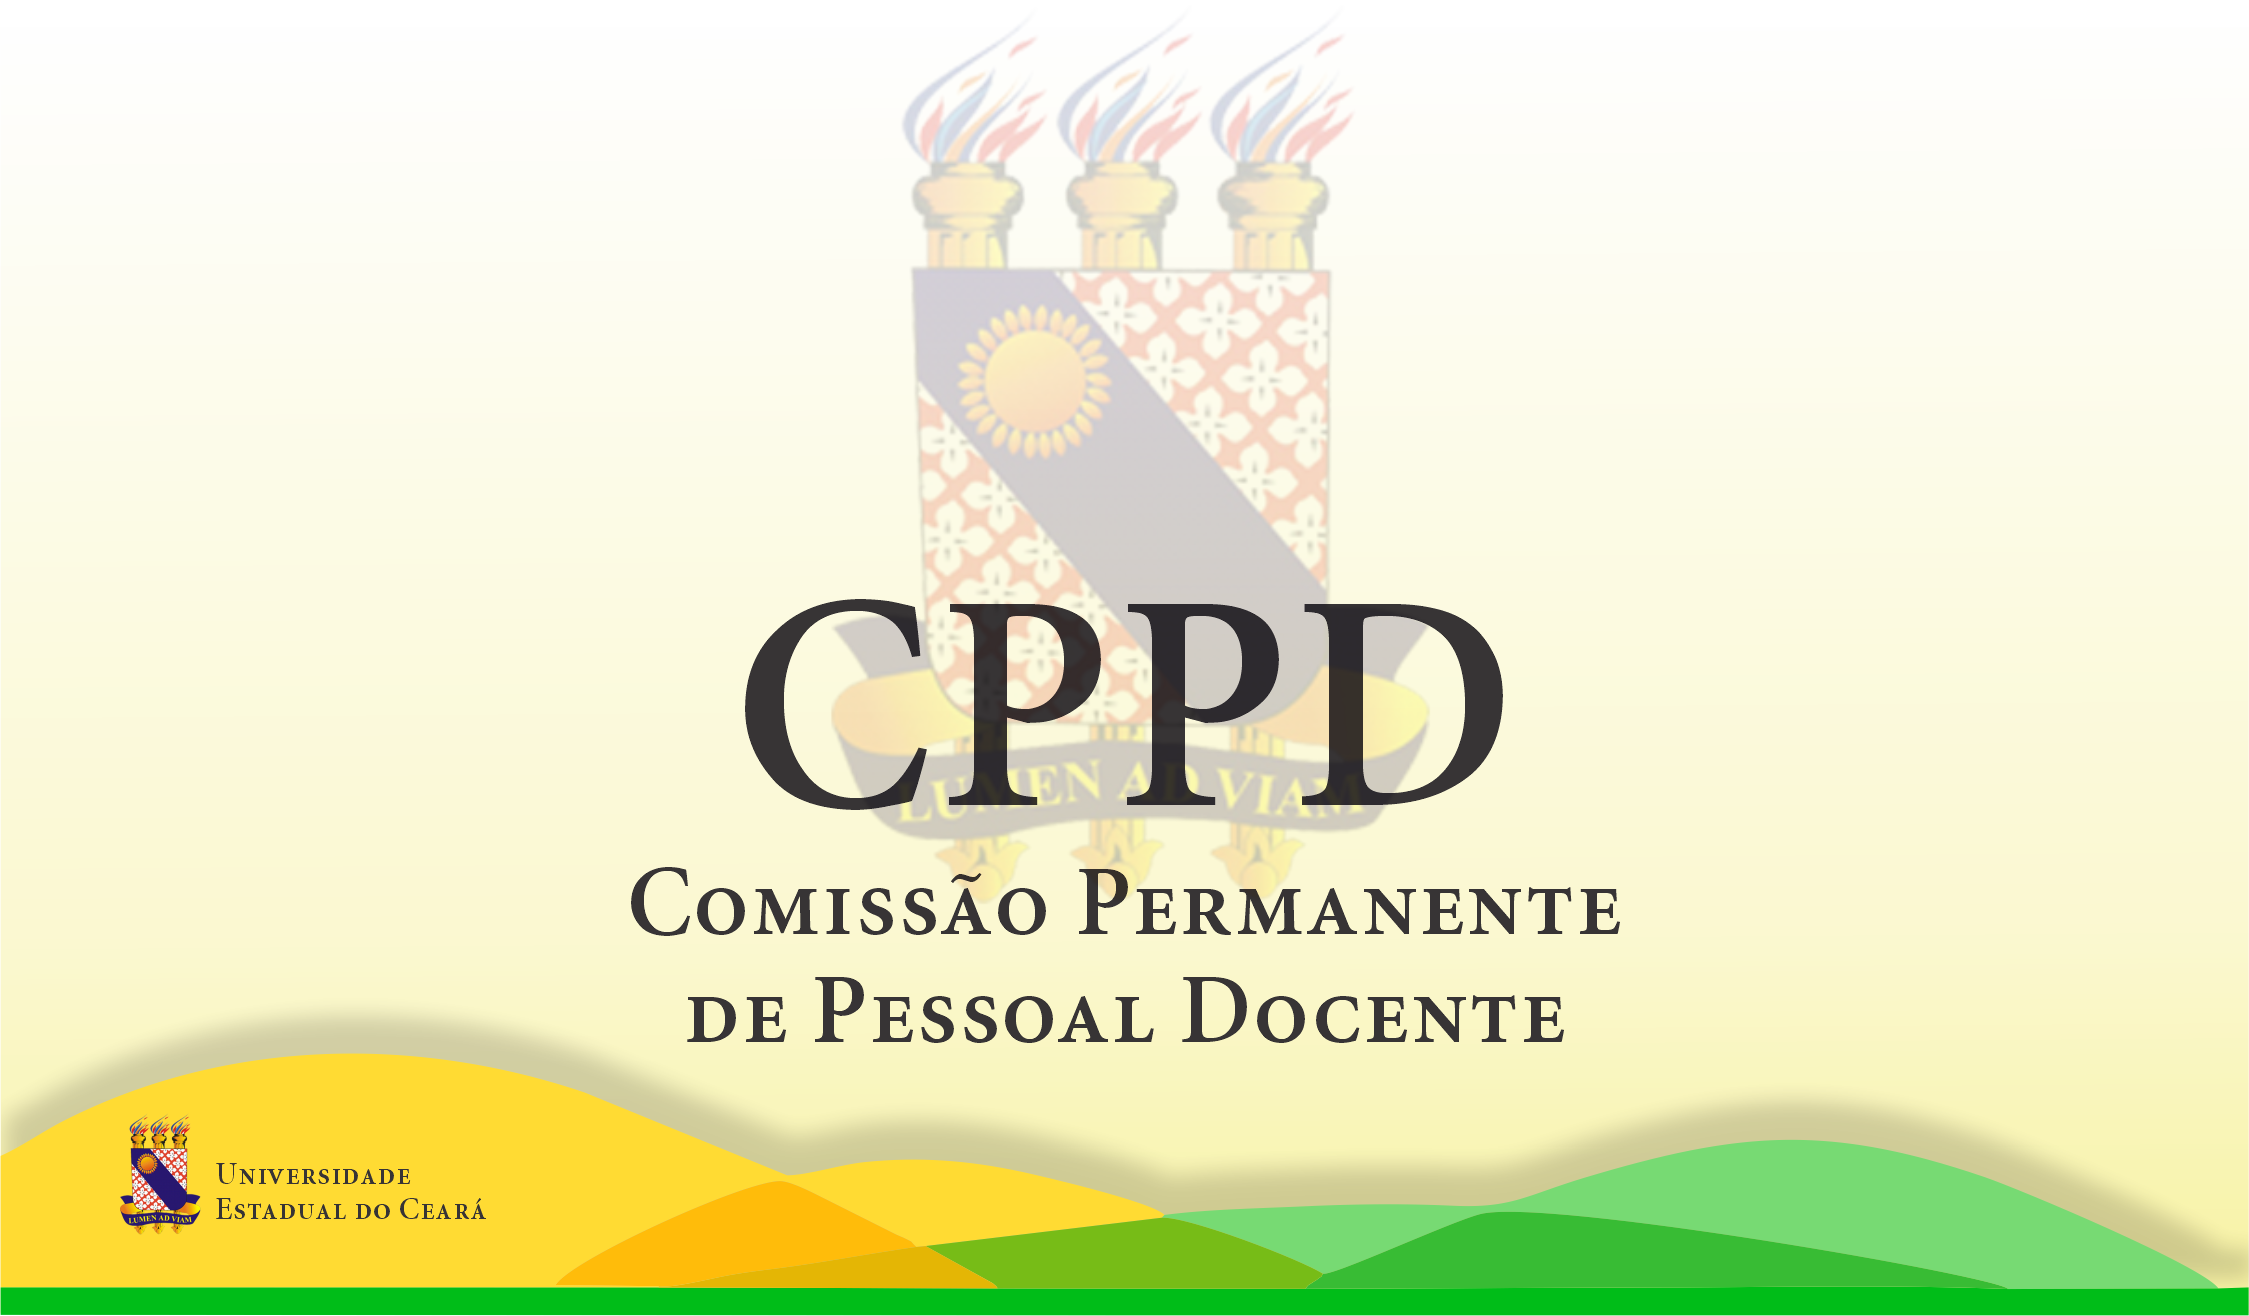 CPPD